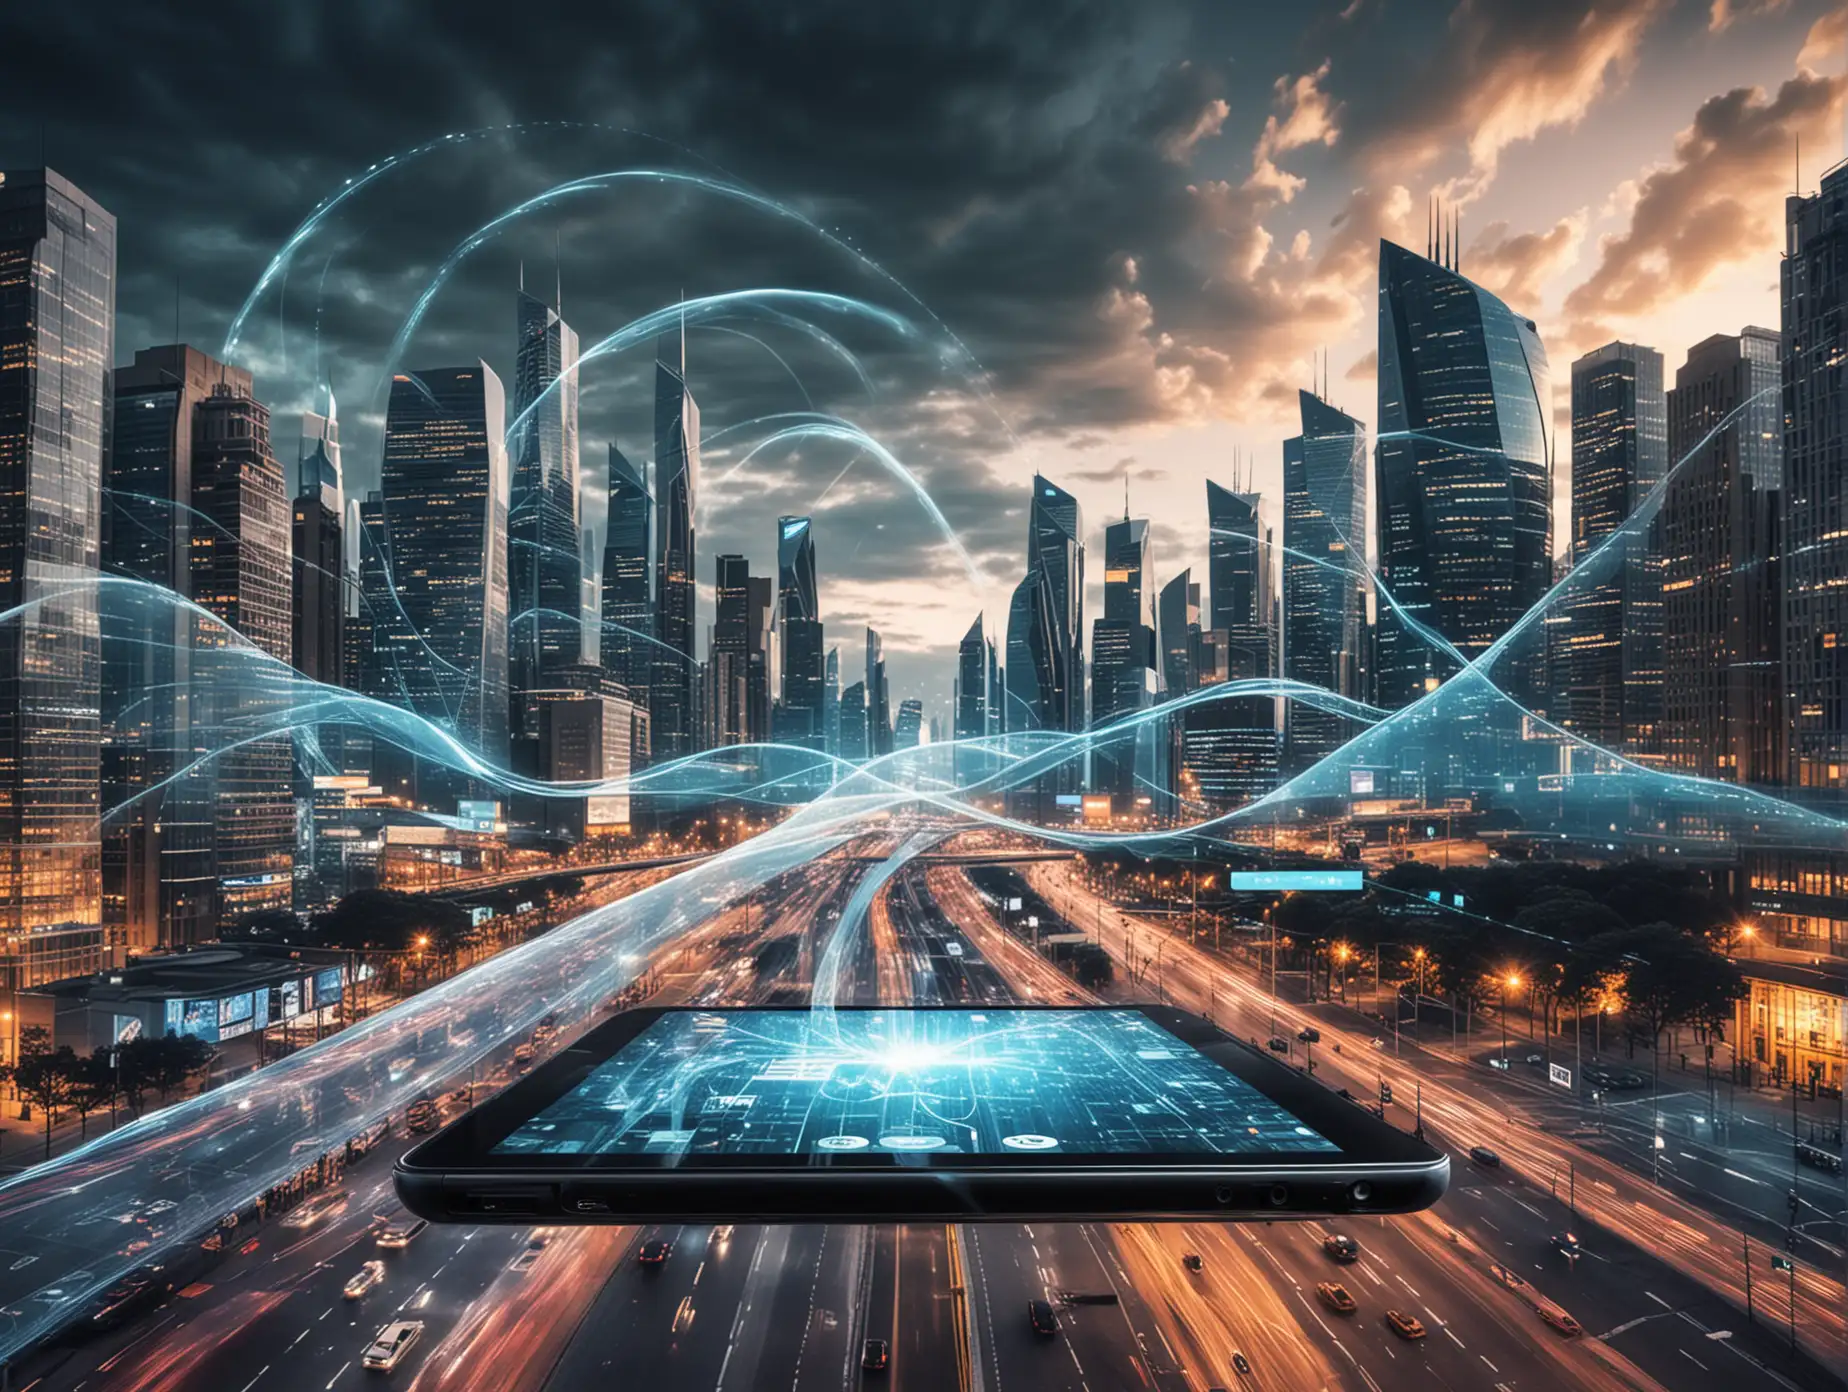 An image representing digital transformation, such as digital waves, futuristic cityscapes, or interconnected devices. This can emphasize the transformative impact of the eLearning platform.